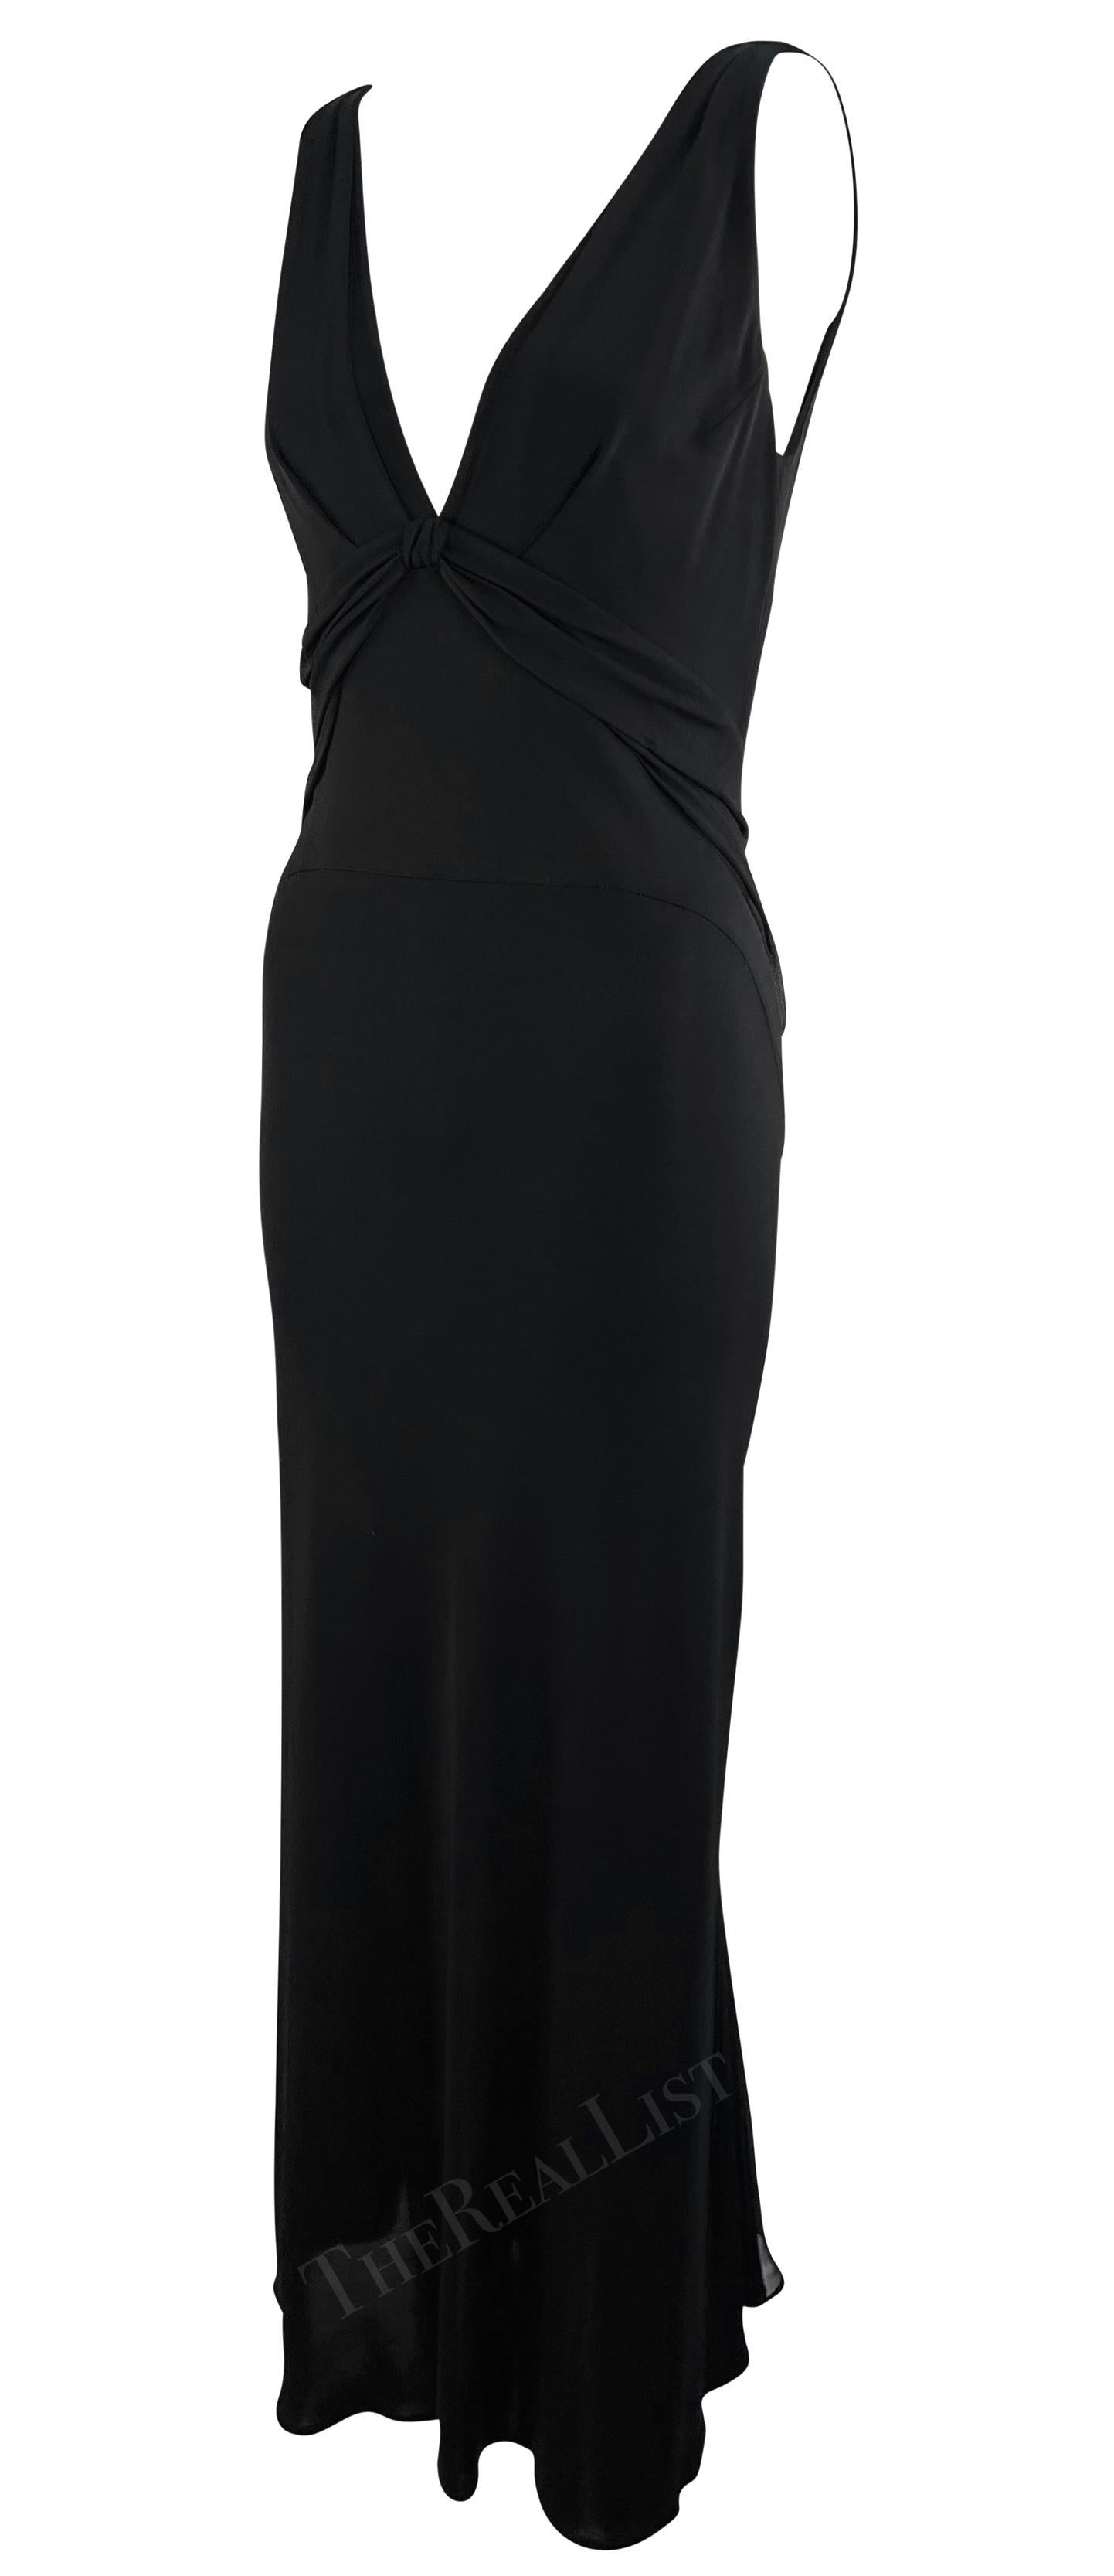 From the mid 2000s, this black bodycon Yigal Azrouël gown is the perfect elevated essential. Easily dressed up or down, this stretchy gown features a plunging v-neckline with a twisted detail under the bust. 

Approximate measurements:
Size -